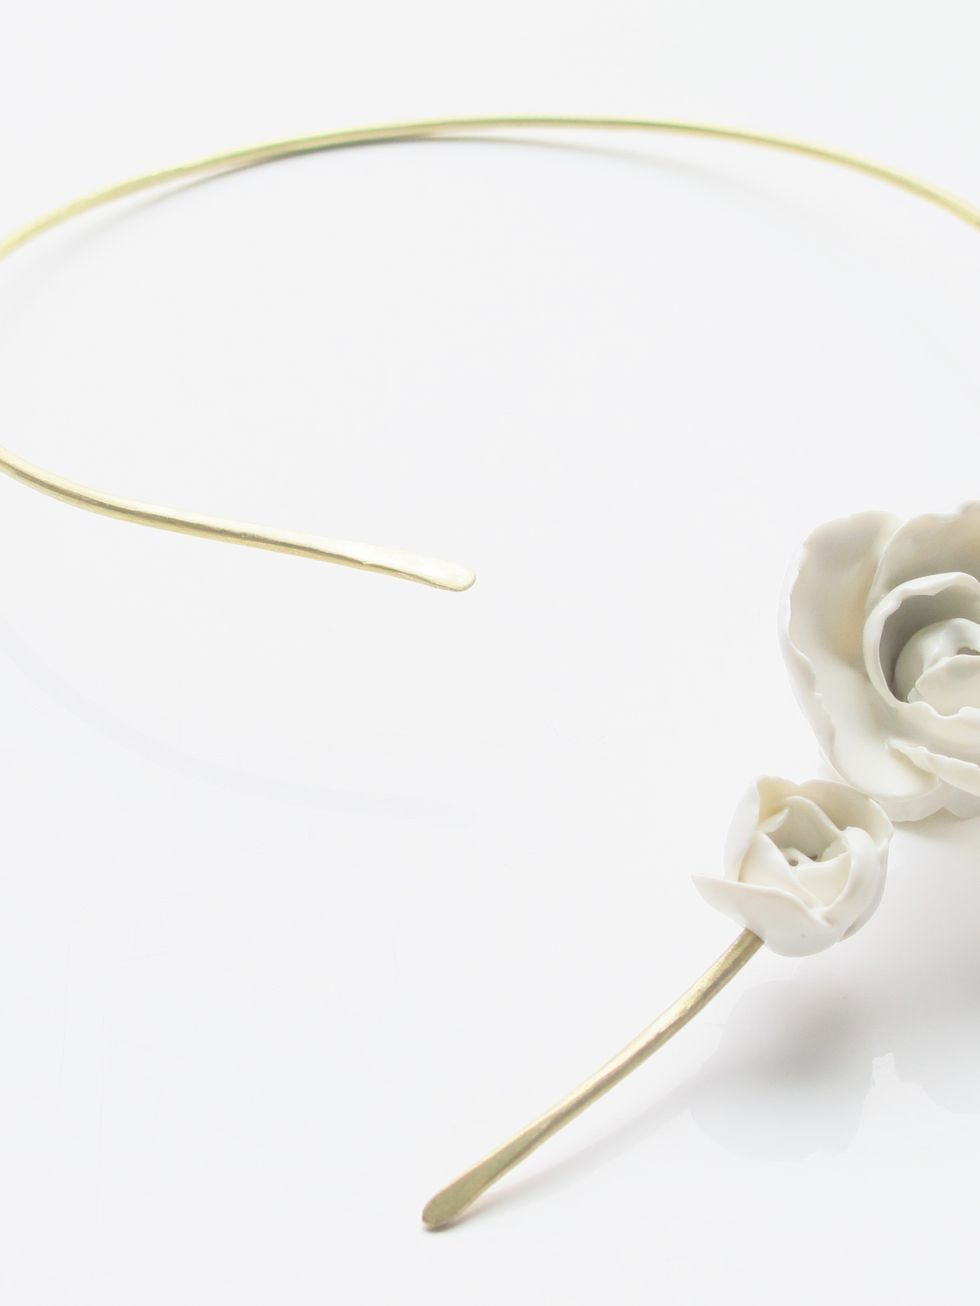 Beige, Artificial flower, Body jewelry, Silver, Hair accessory, Audio accessory, Cut flowers, Craft, Jewelry making, Garden roses, 